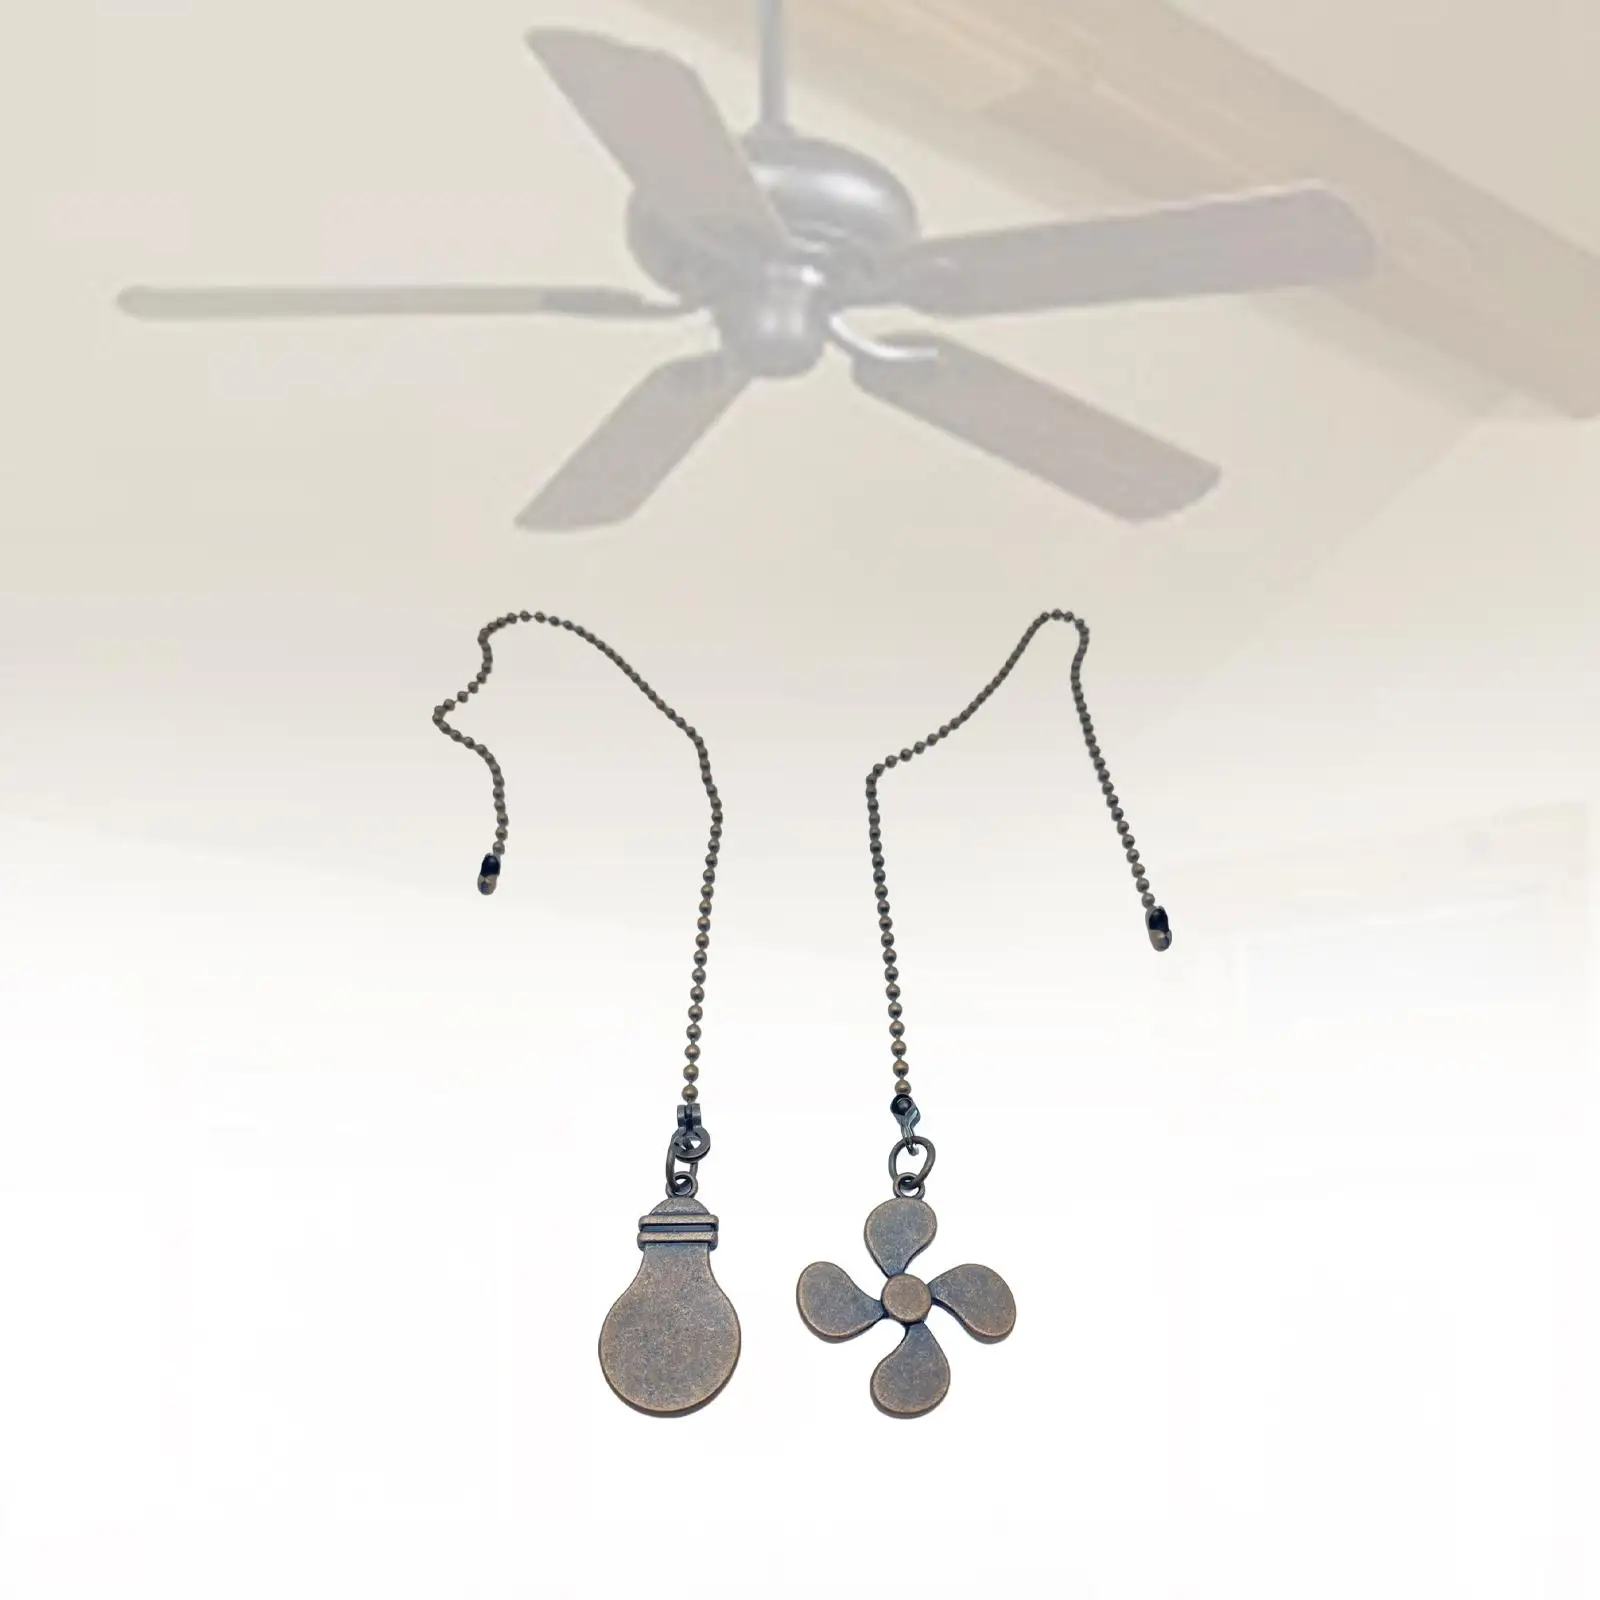 Ceiling Fan Pull Chain Ornaments Connector Fan Pull Chain Extender for Lamp Bedroom